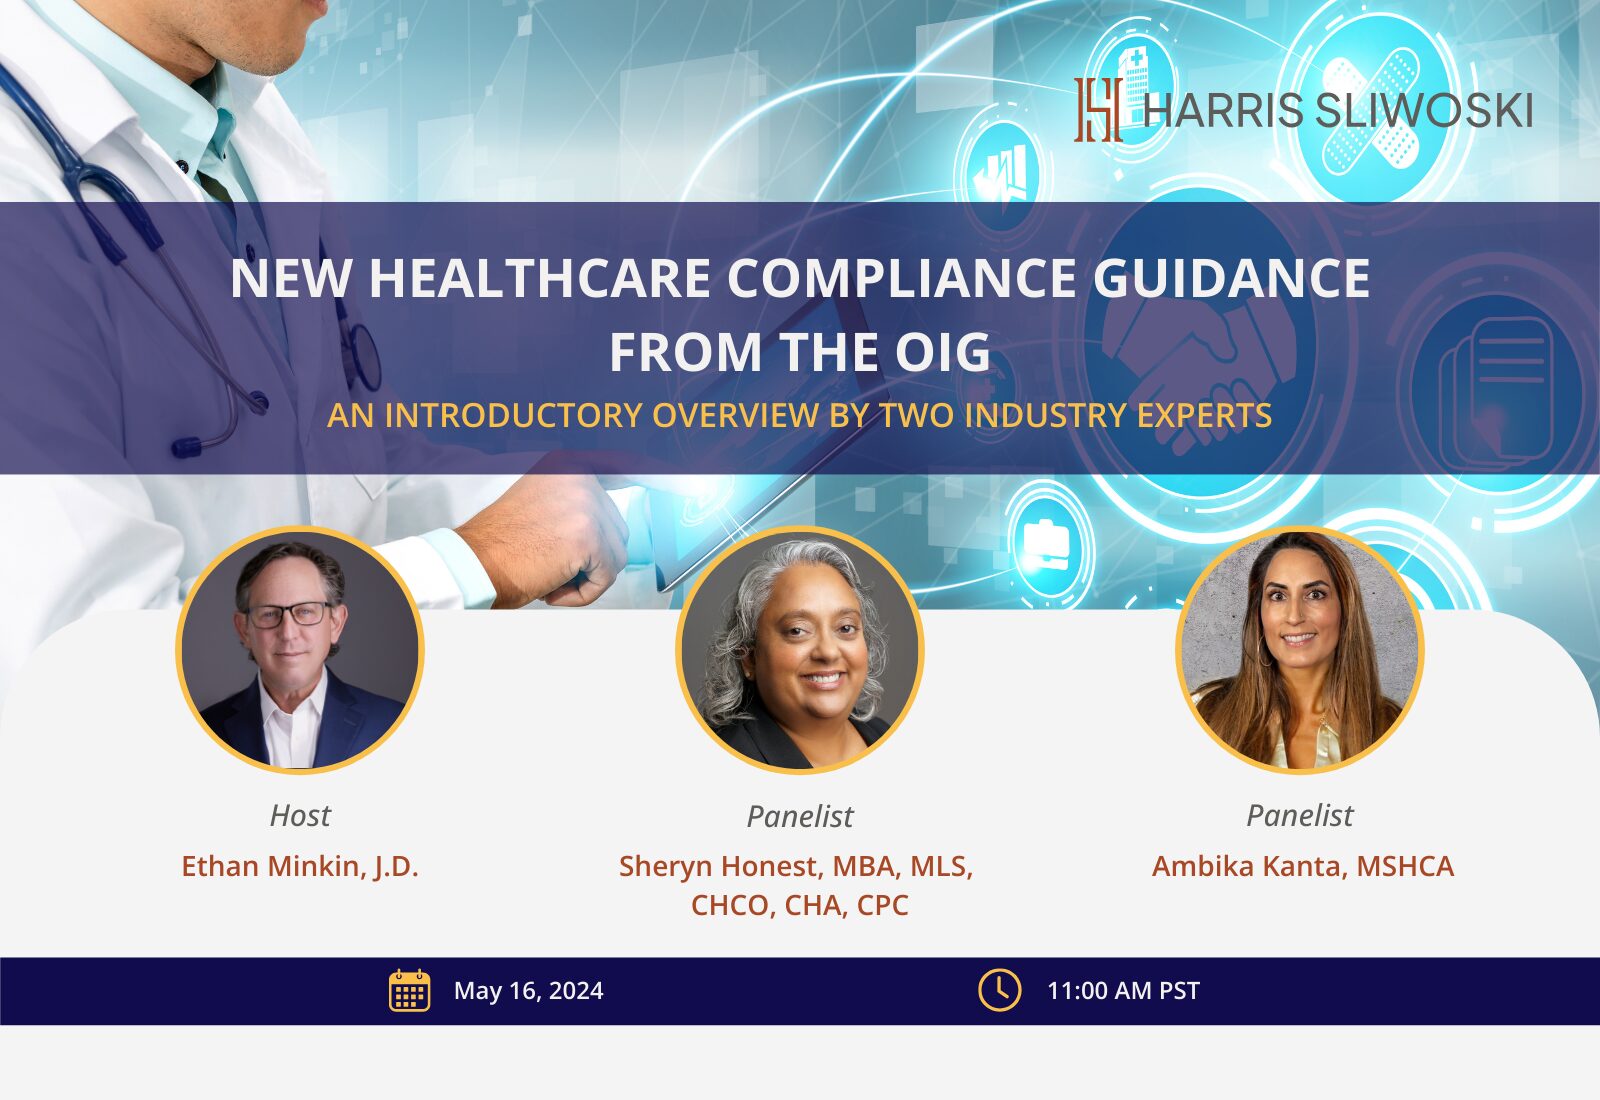 New Healthcare Compliance Guidance from the OIG – an Introductory Overview by Two Industry Experts